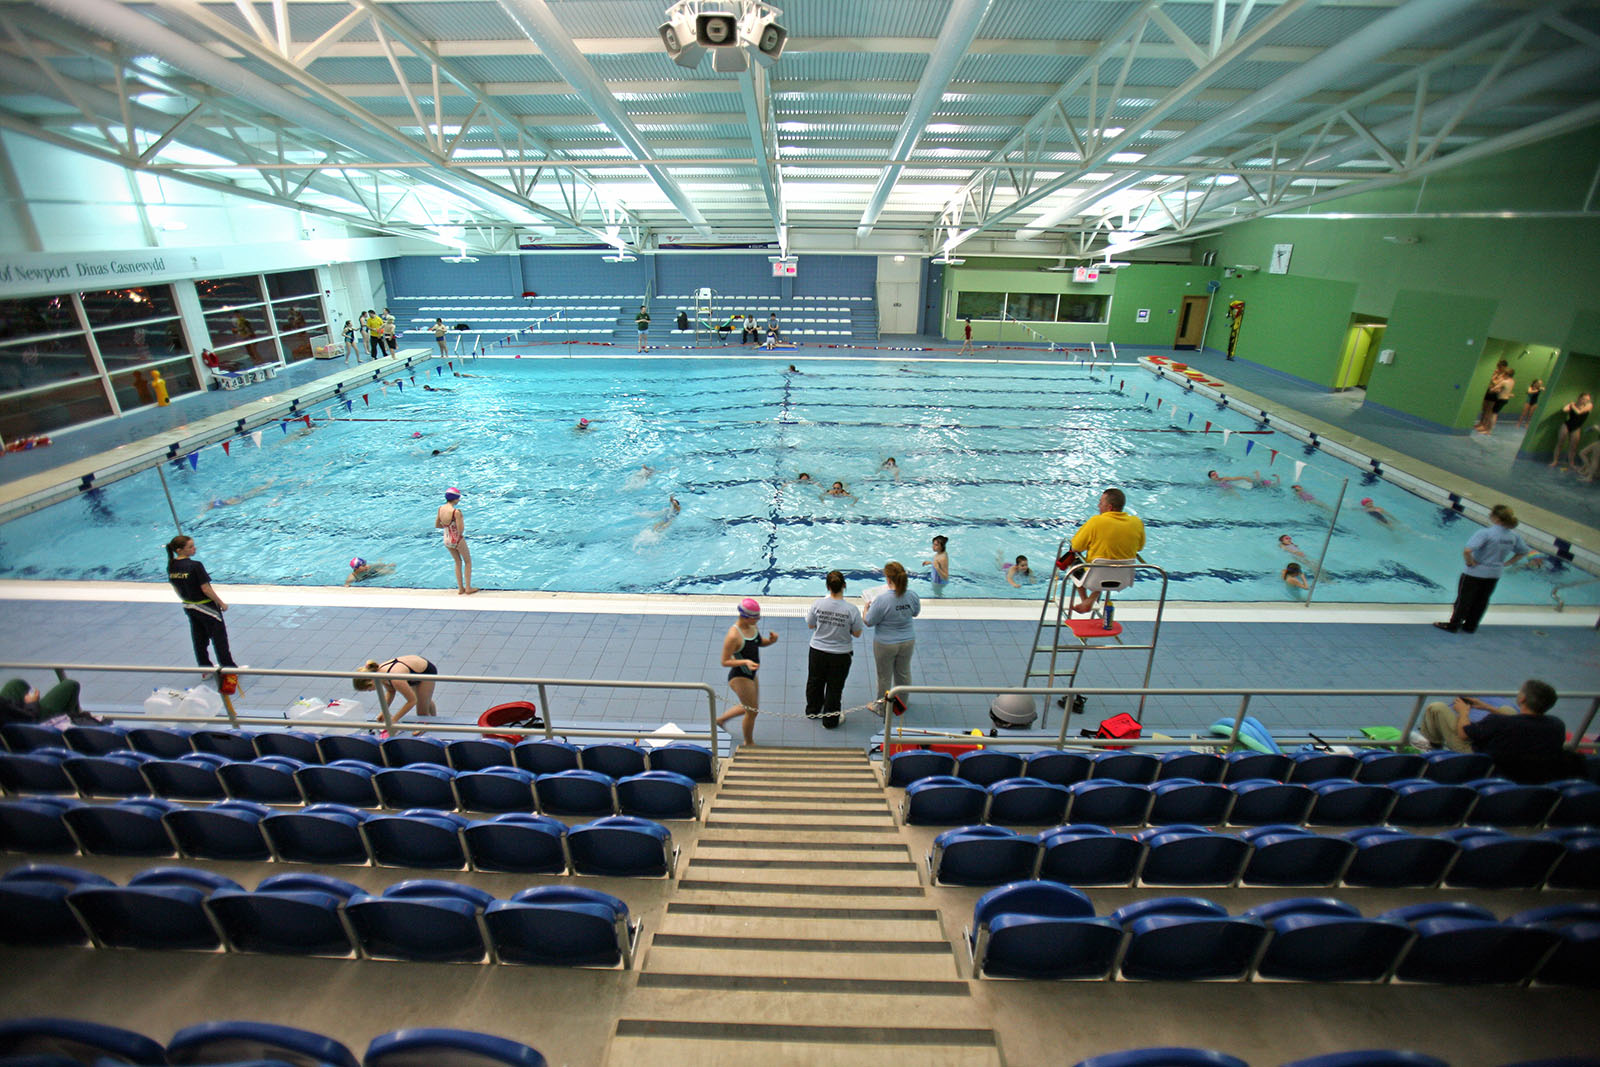 Indoor swimming pool at regional pool and tennis centre